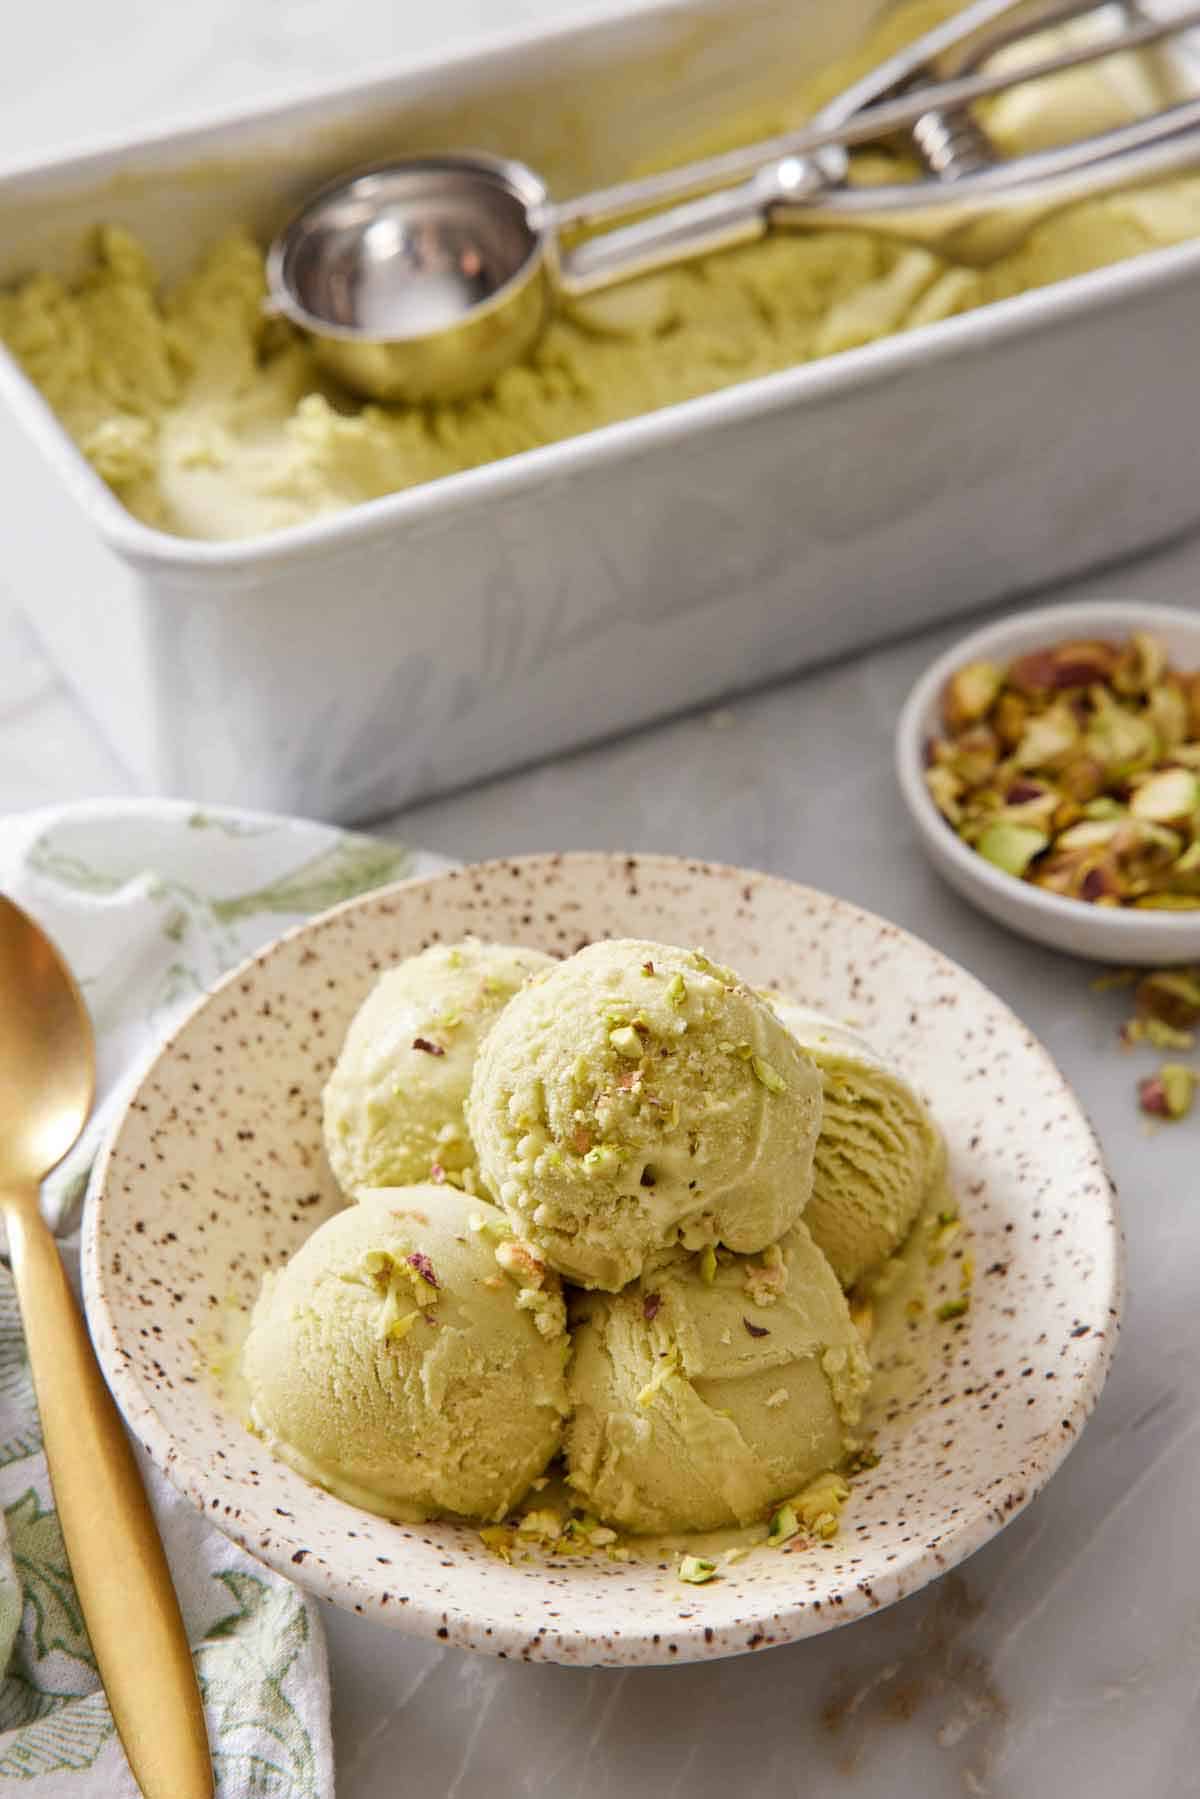 A plate with multiple scoops of pistachio ice cream with more ice cream in the background in a container with an ice cream scoop.